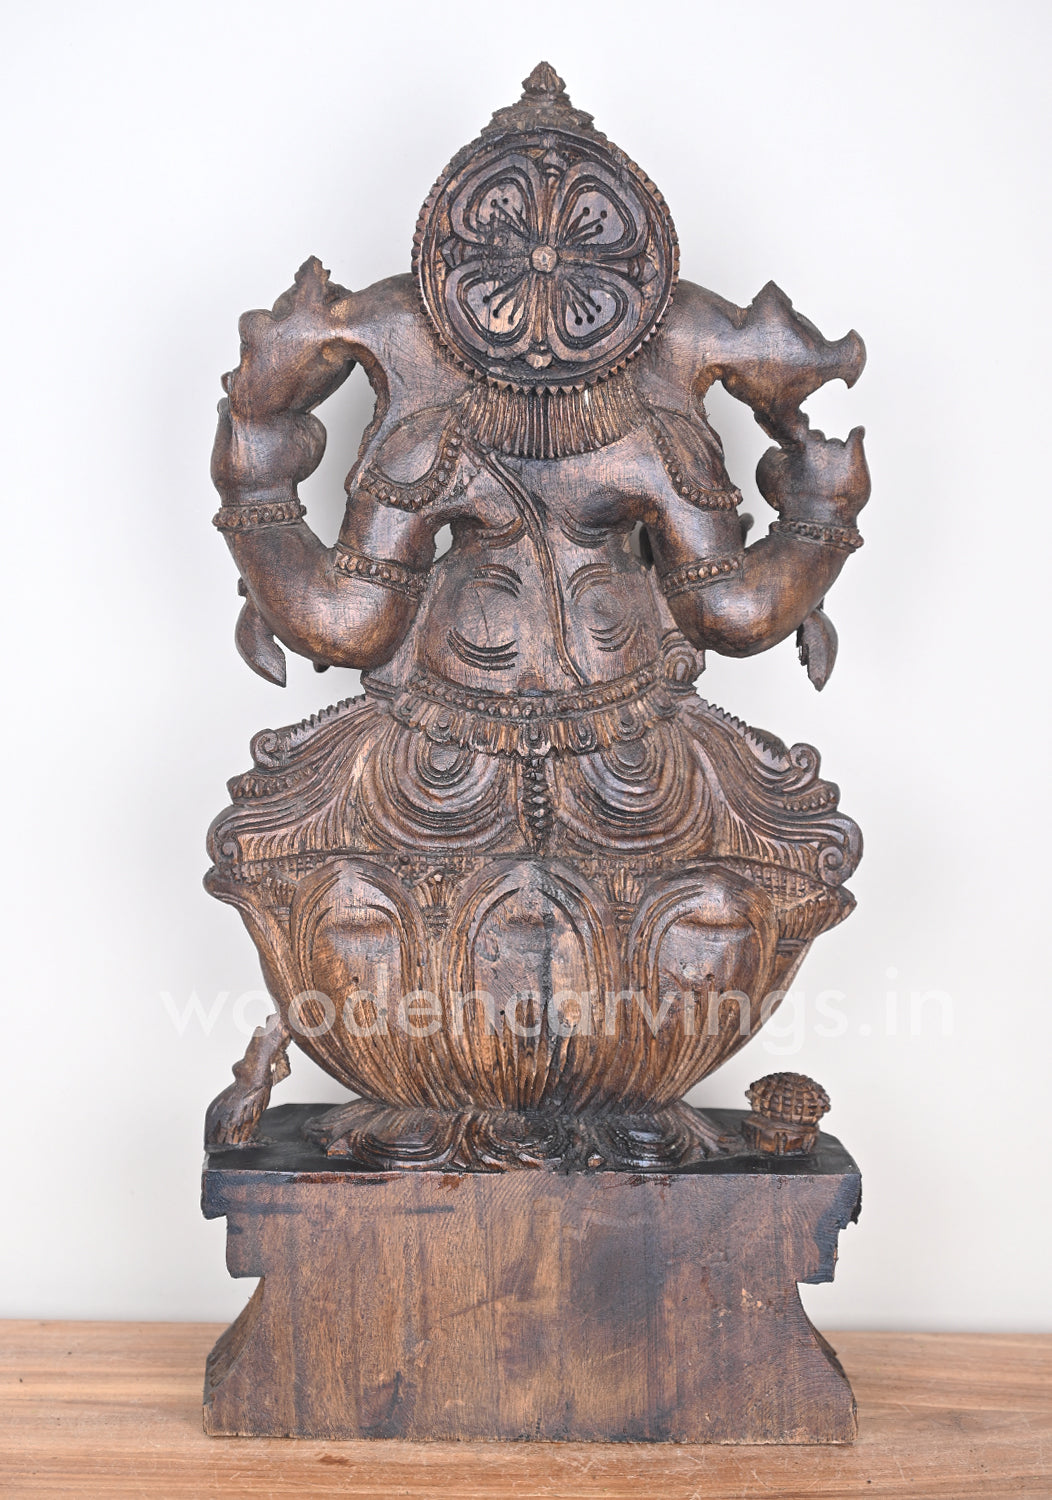 Prosperity Lord Ganesha Simply Seated on Lotus Wooden Sculpture 25"